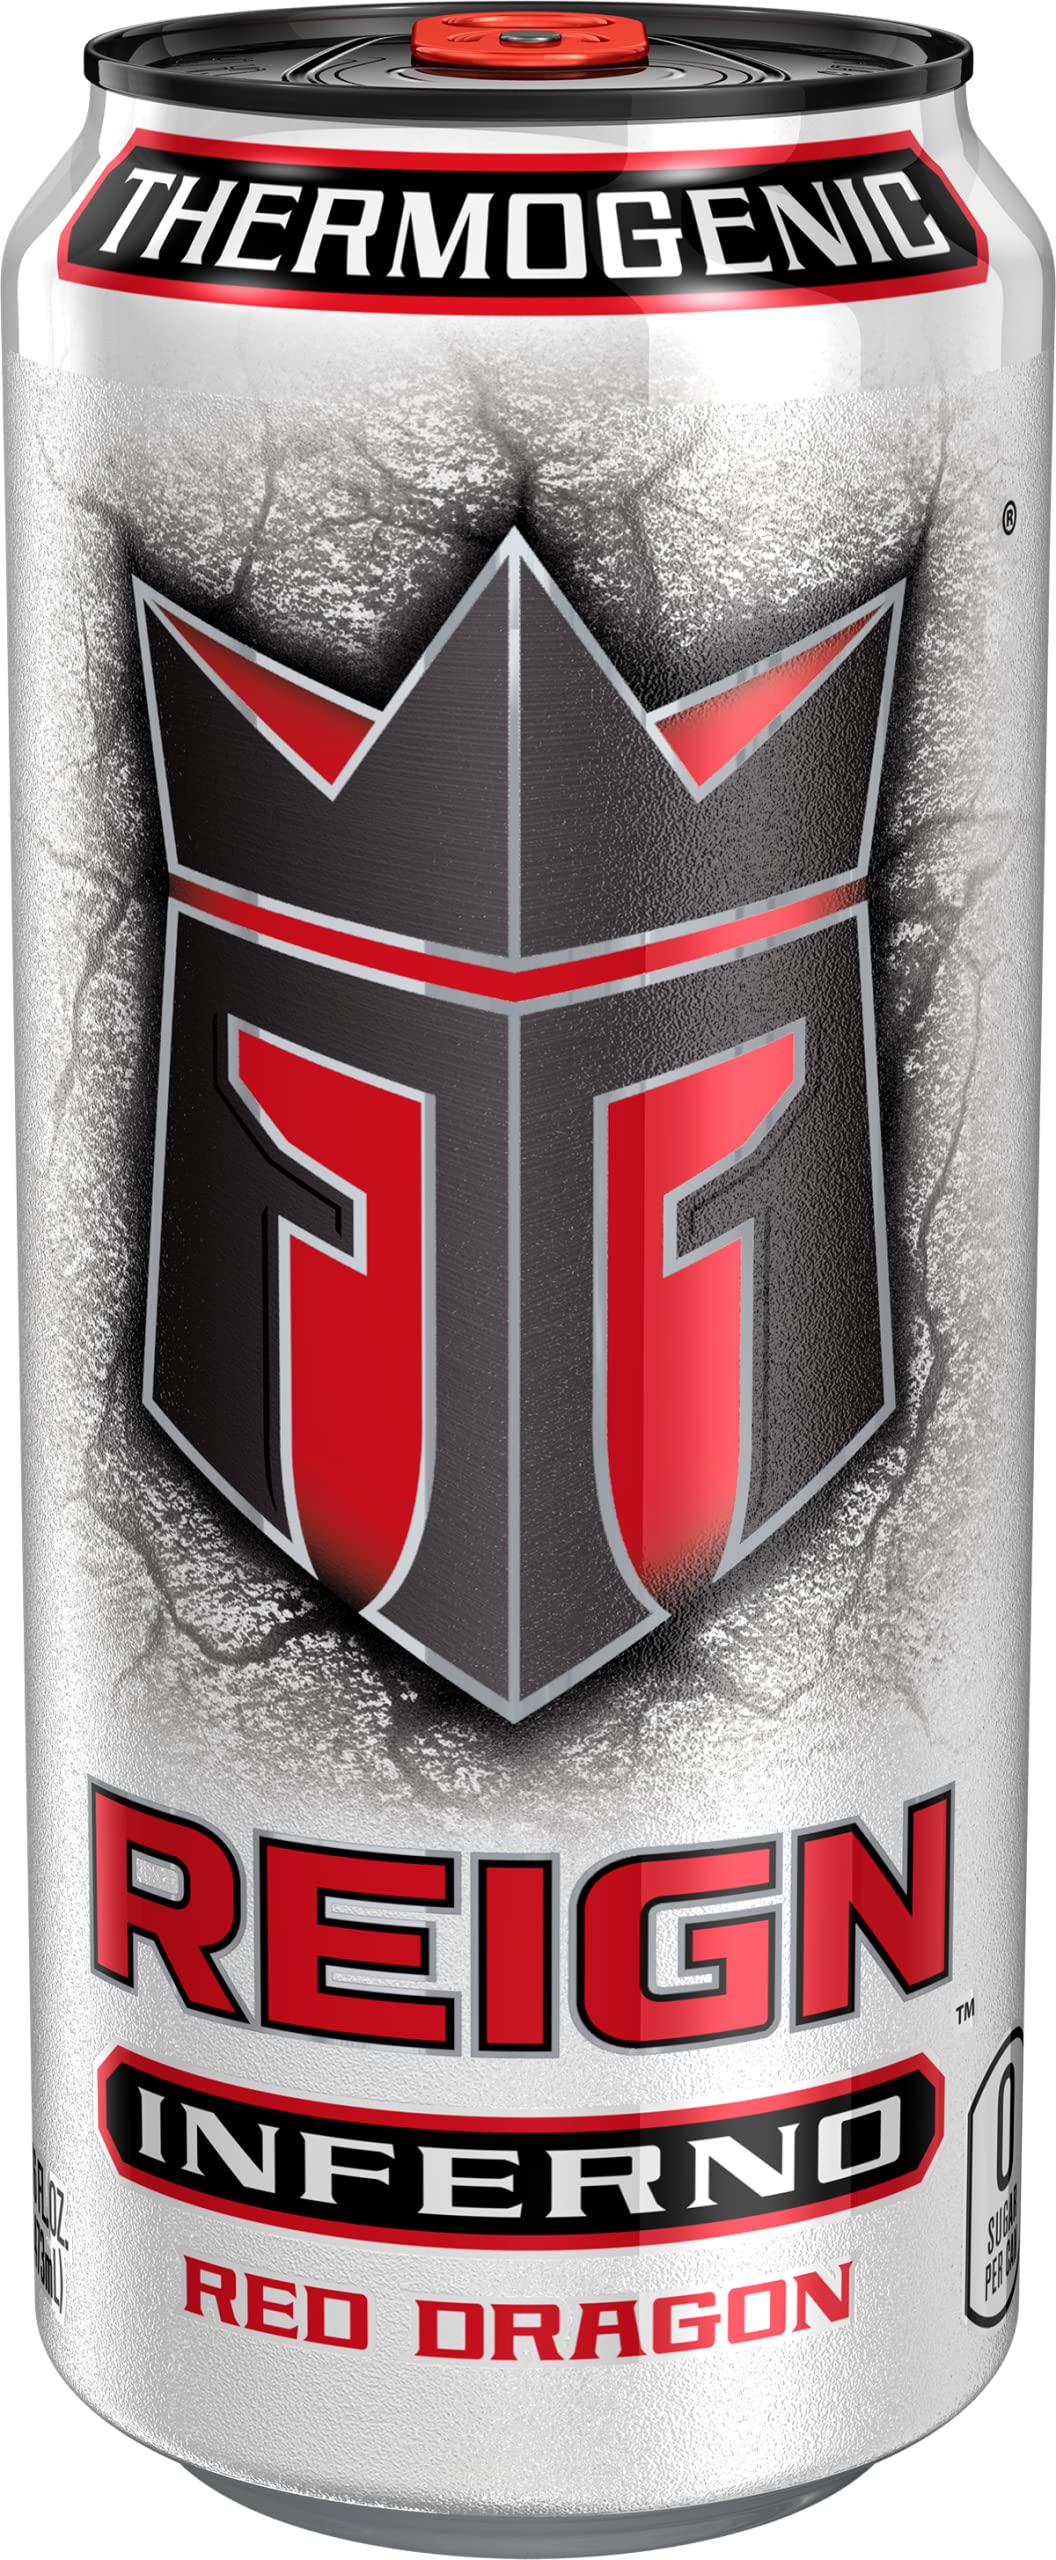 Reign Inferno Red Dragon, Thermogenic Fuel, Fitness and Performance Drink, 16 Fl Oz (Pack of 12)